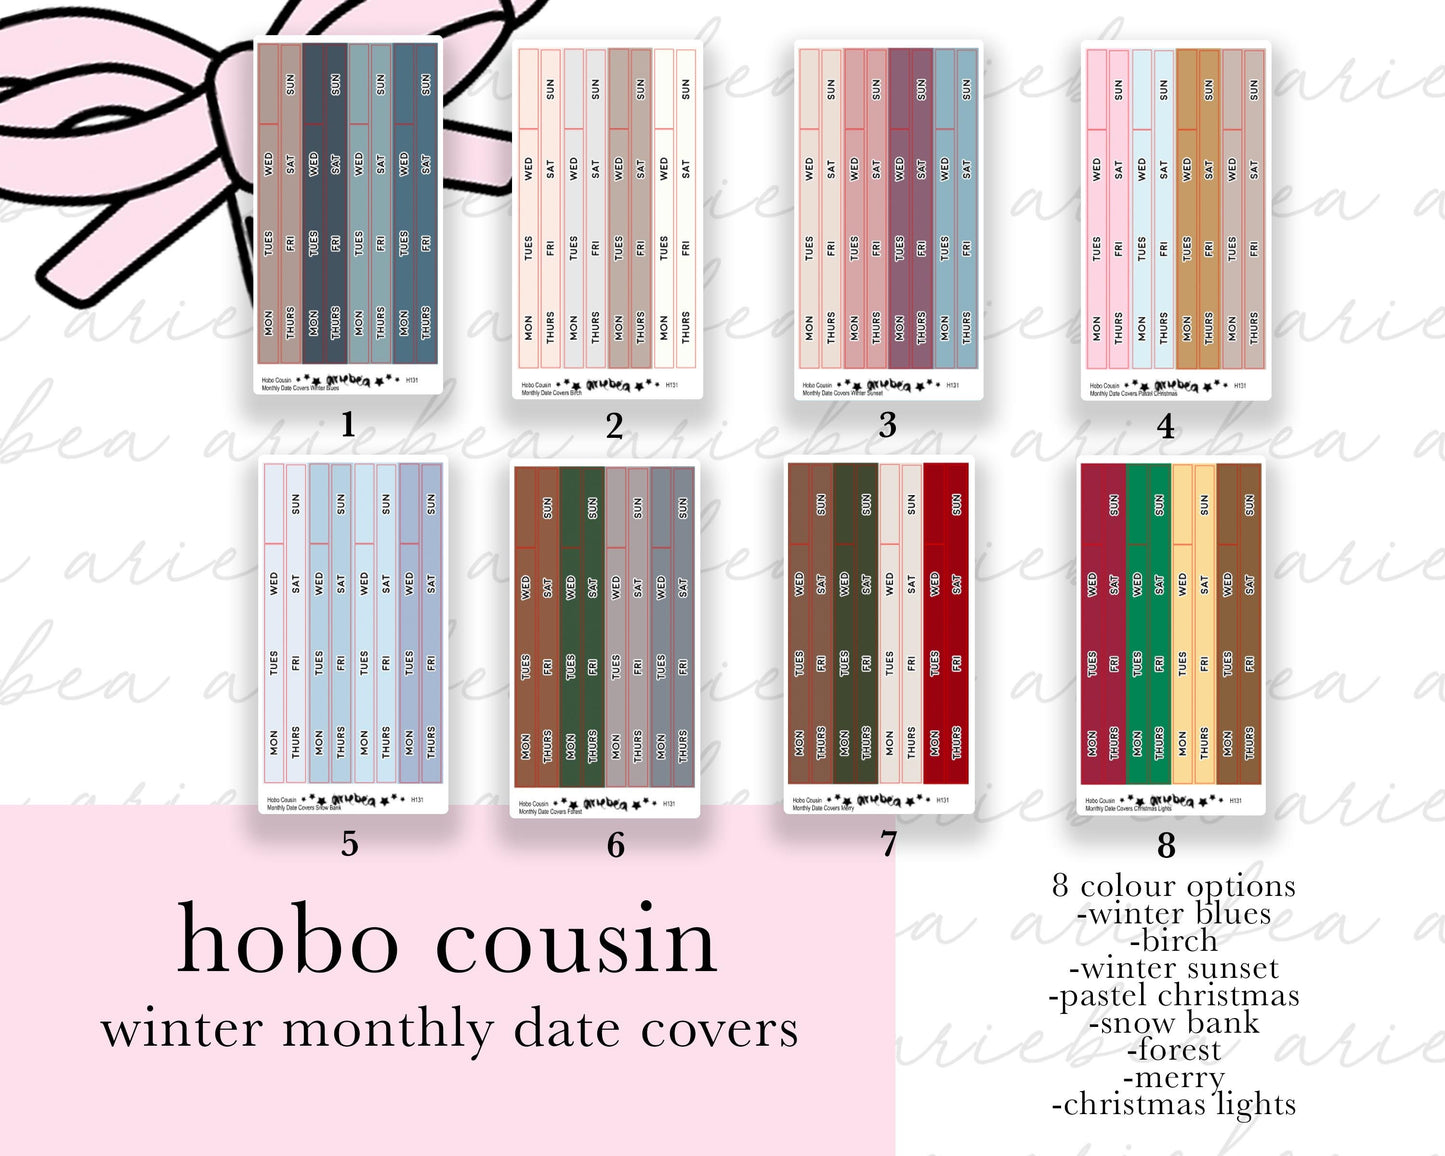 NEW WINTER MONTHLY Hobonichi Cousin Date Cover Flags Planner Stickers